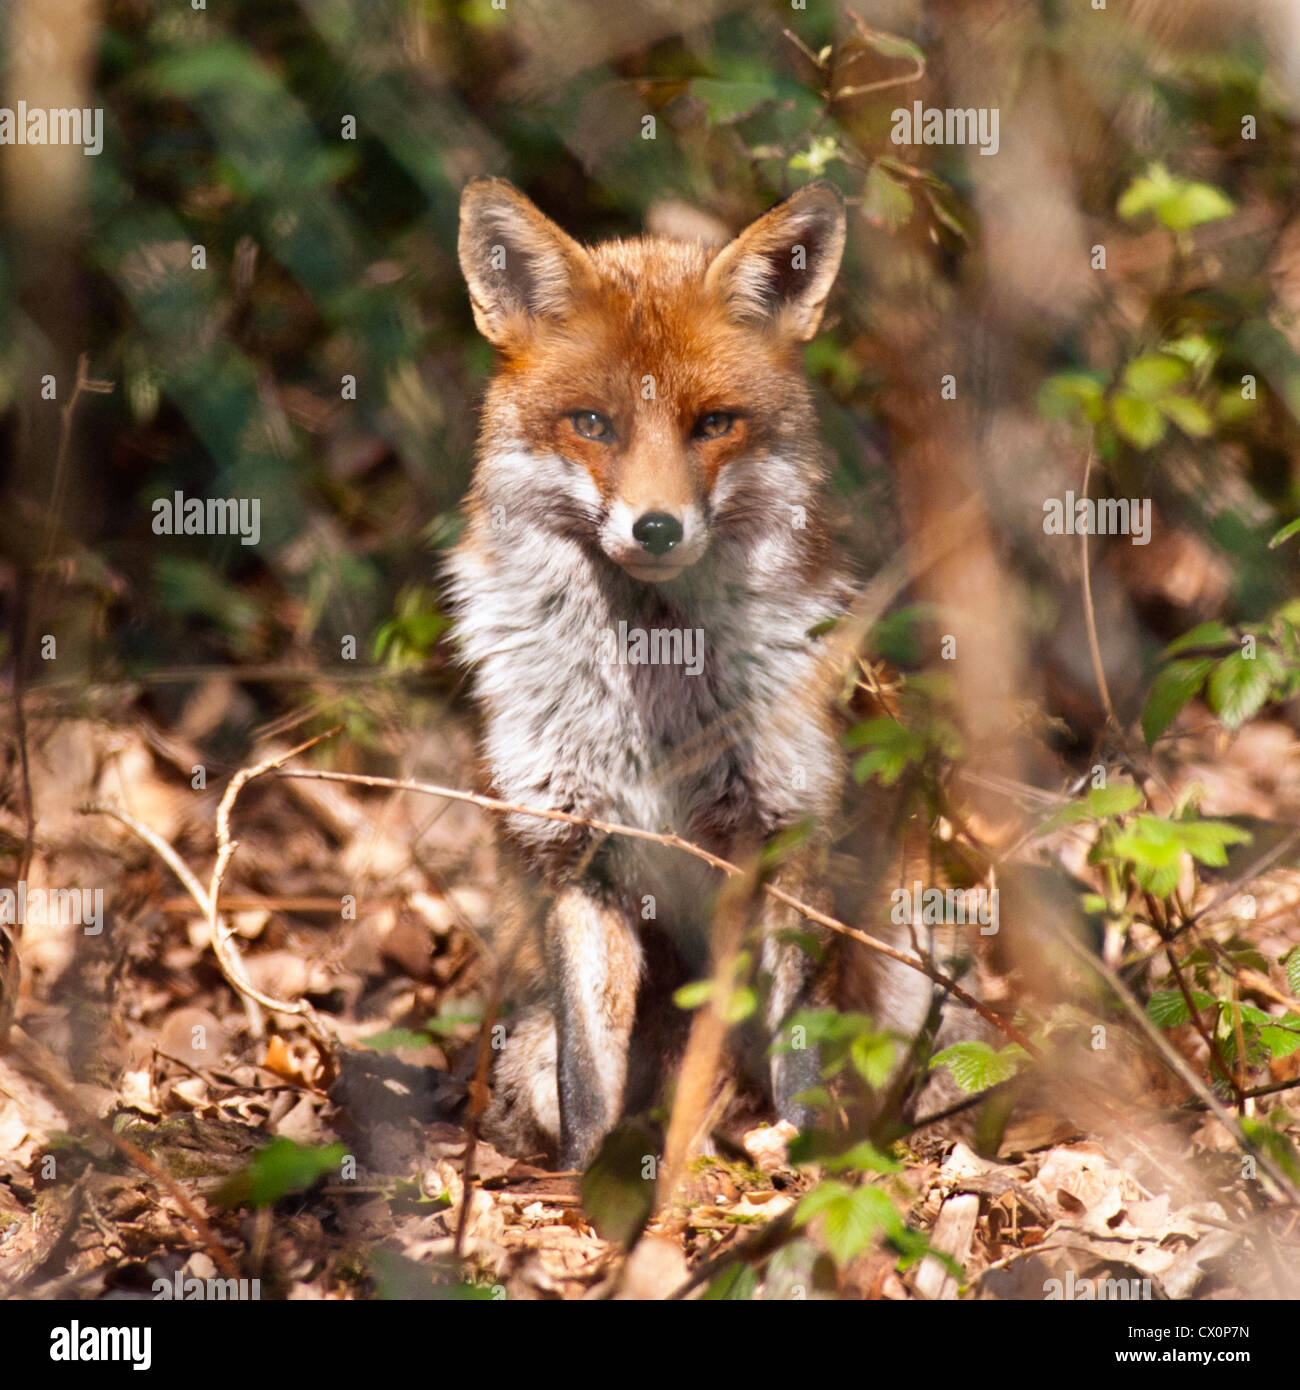 The Stare. Chance encounter with a beautiful red fox Stock Photo